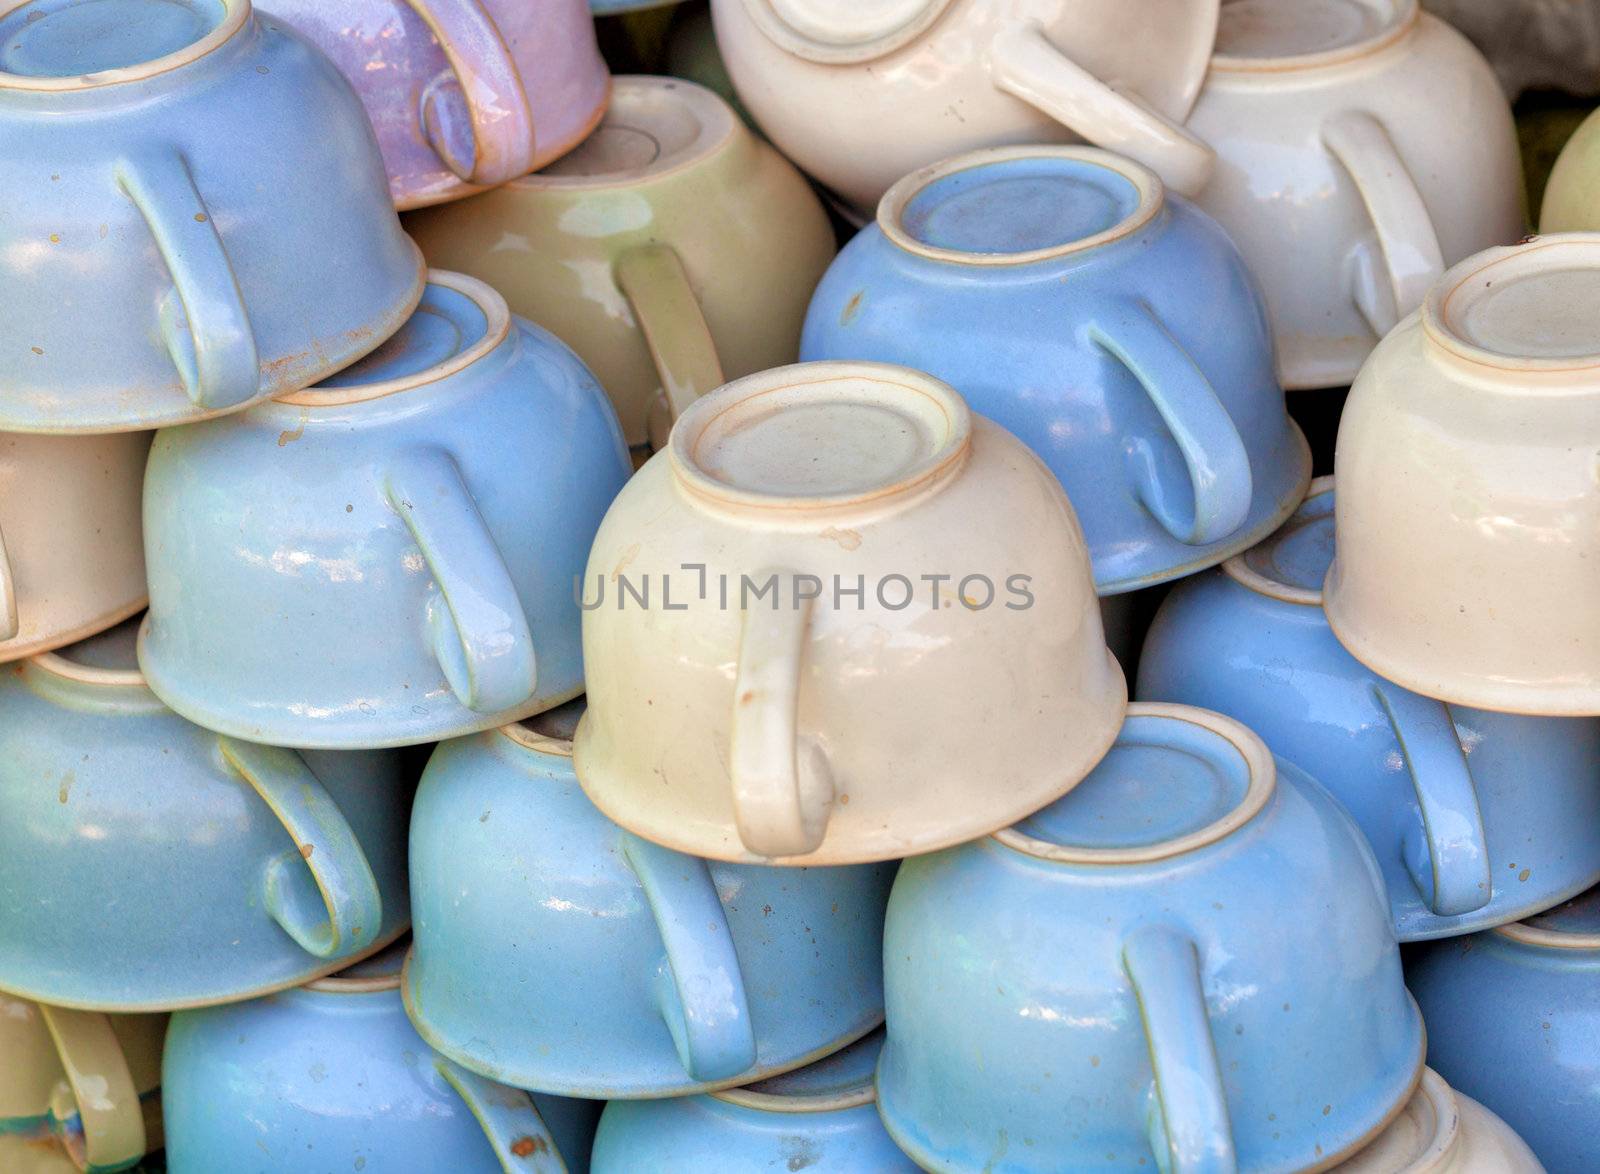 Old-fashioned ceramic chamber pots on the market by pzaxe